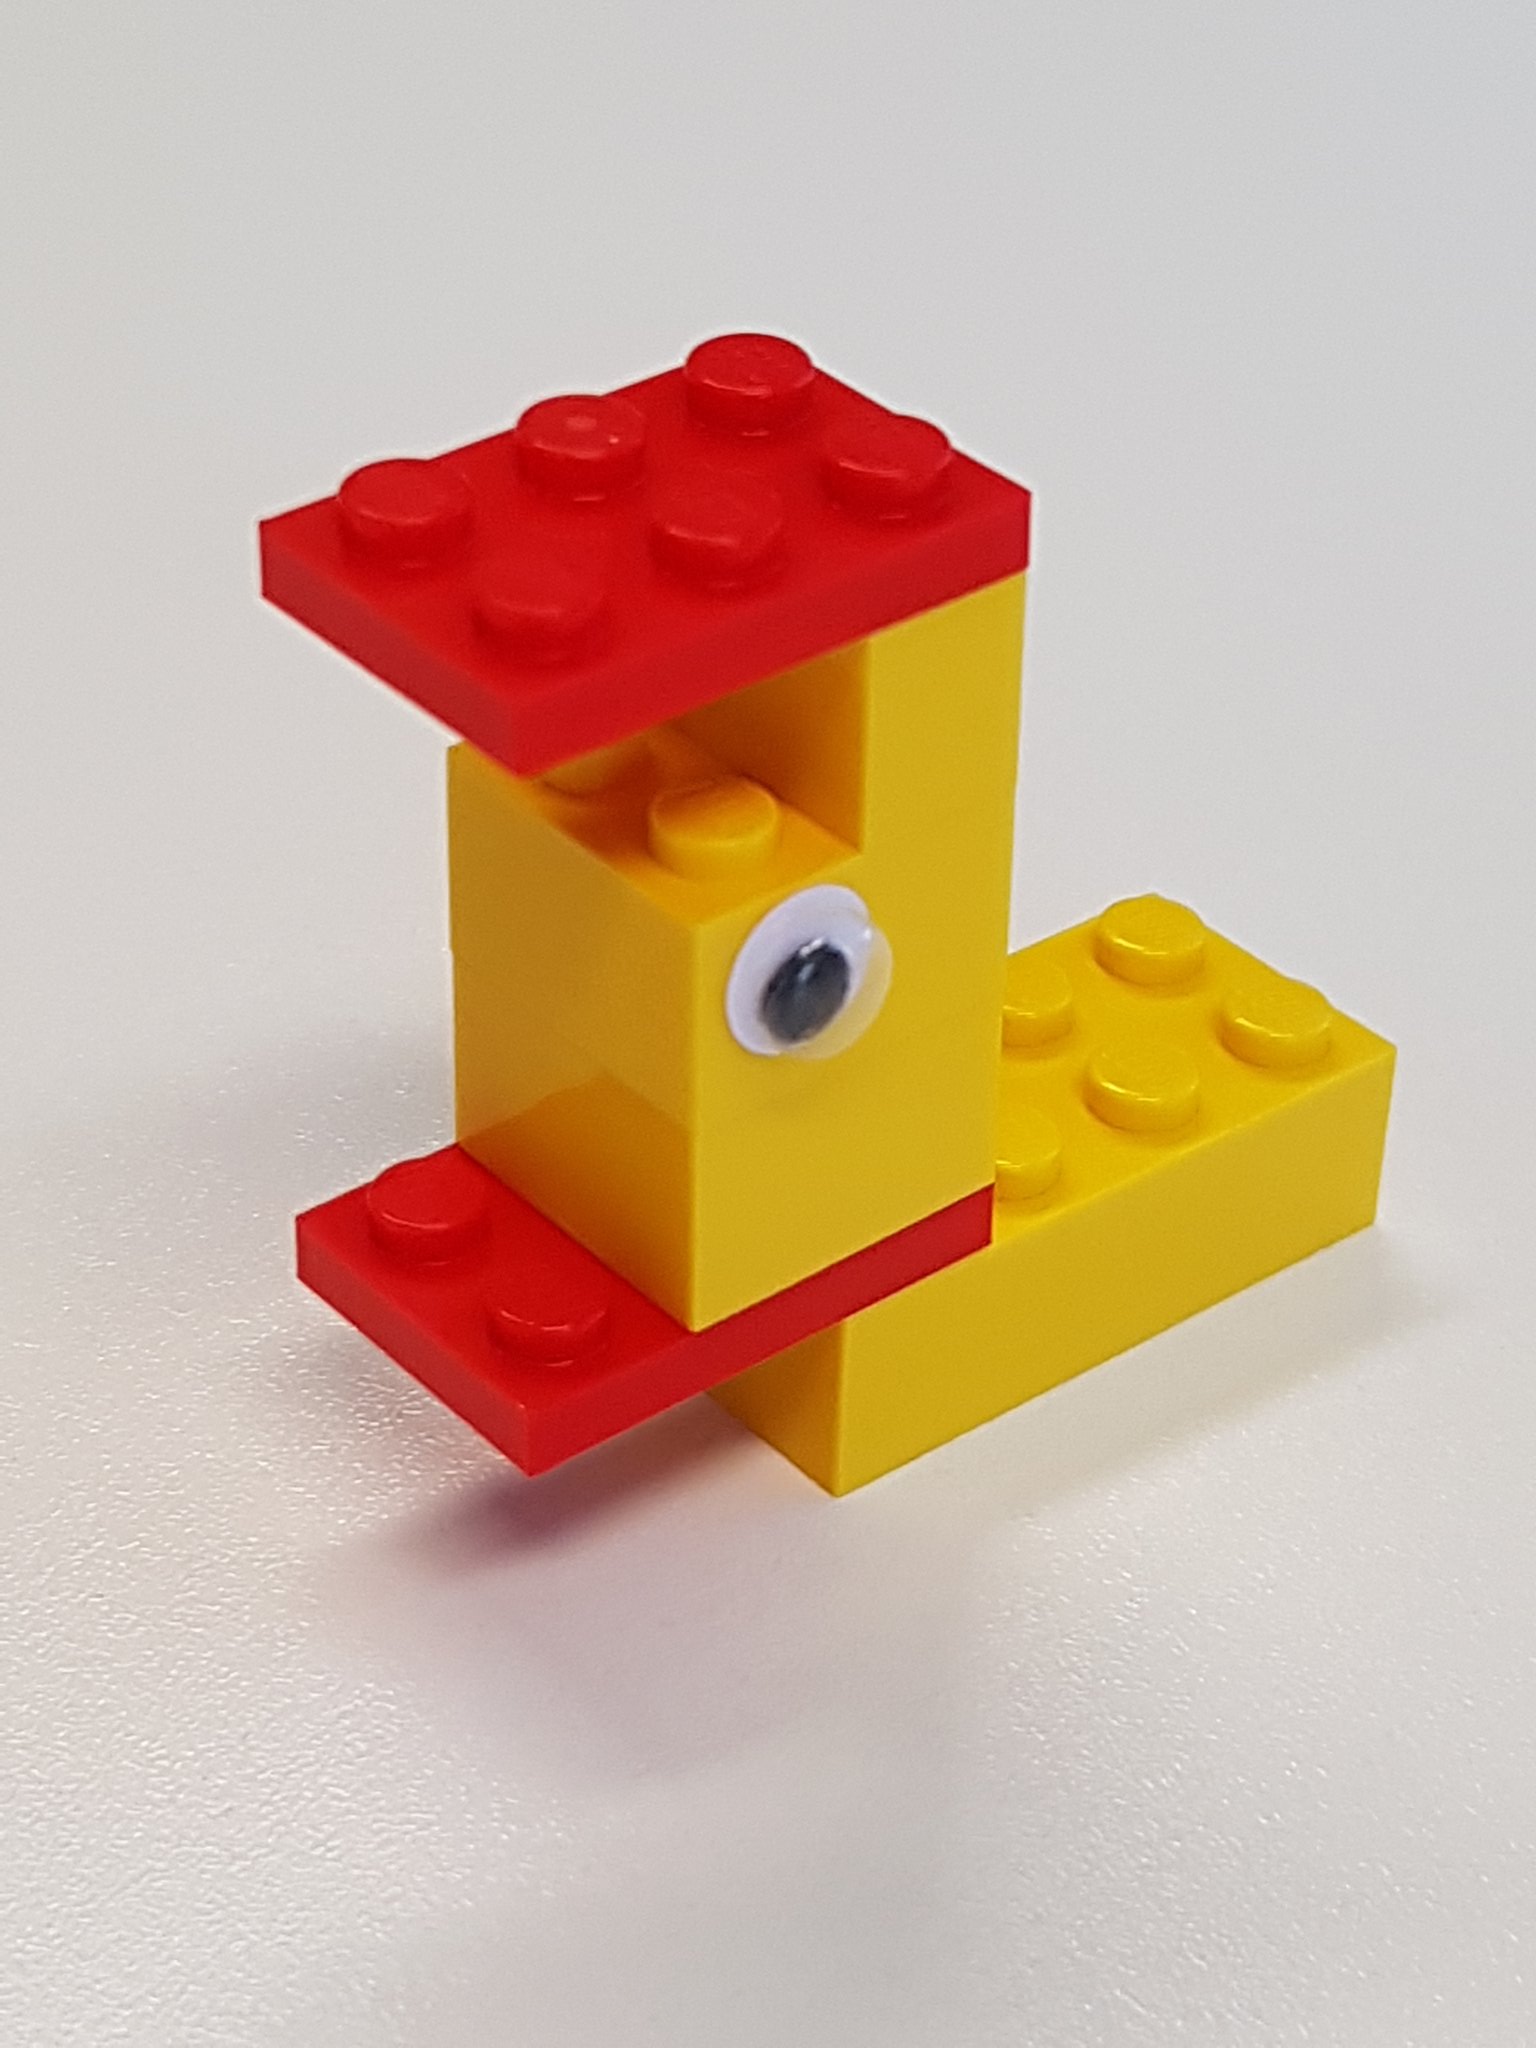 Our poor mistreated lego duck or is it a rooster? #SocMedHE17 #elvislives https://t.co/HGGtRx4YZe